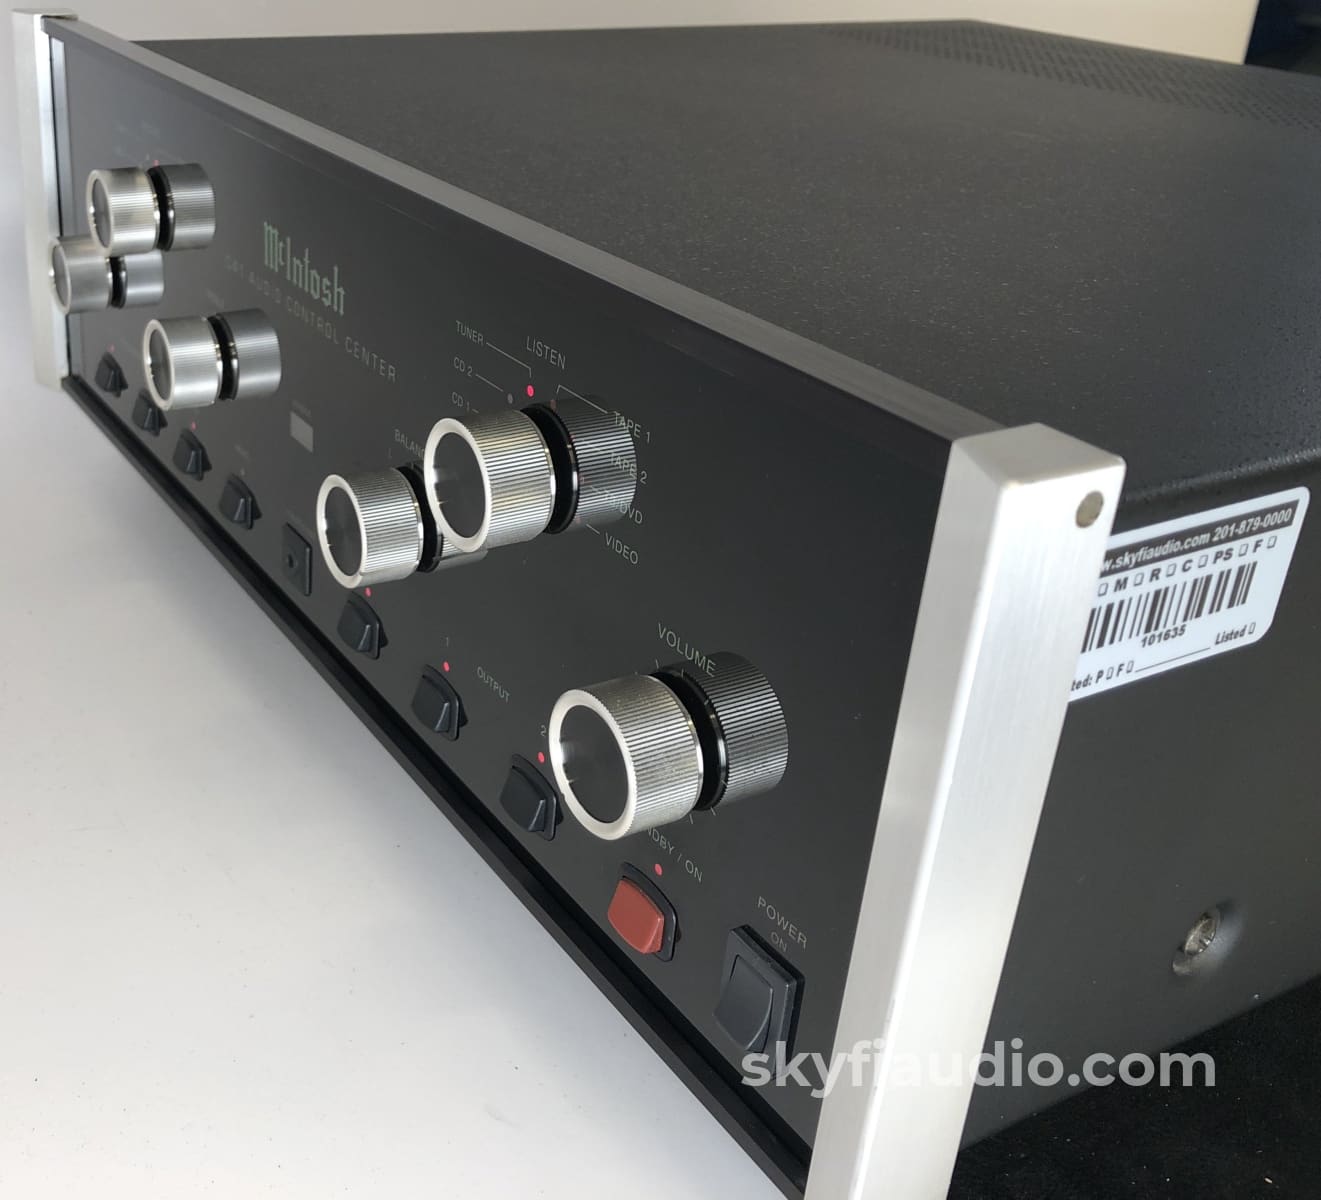 Mcintosh C41 Analog Preamp With Phono Input - Survivor Condition Complete Set Preamplifier